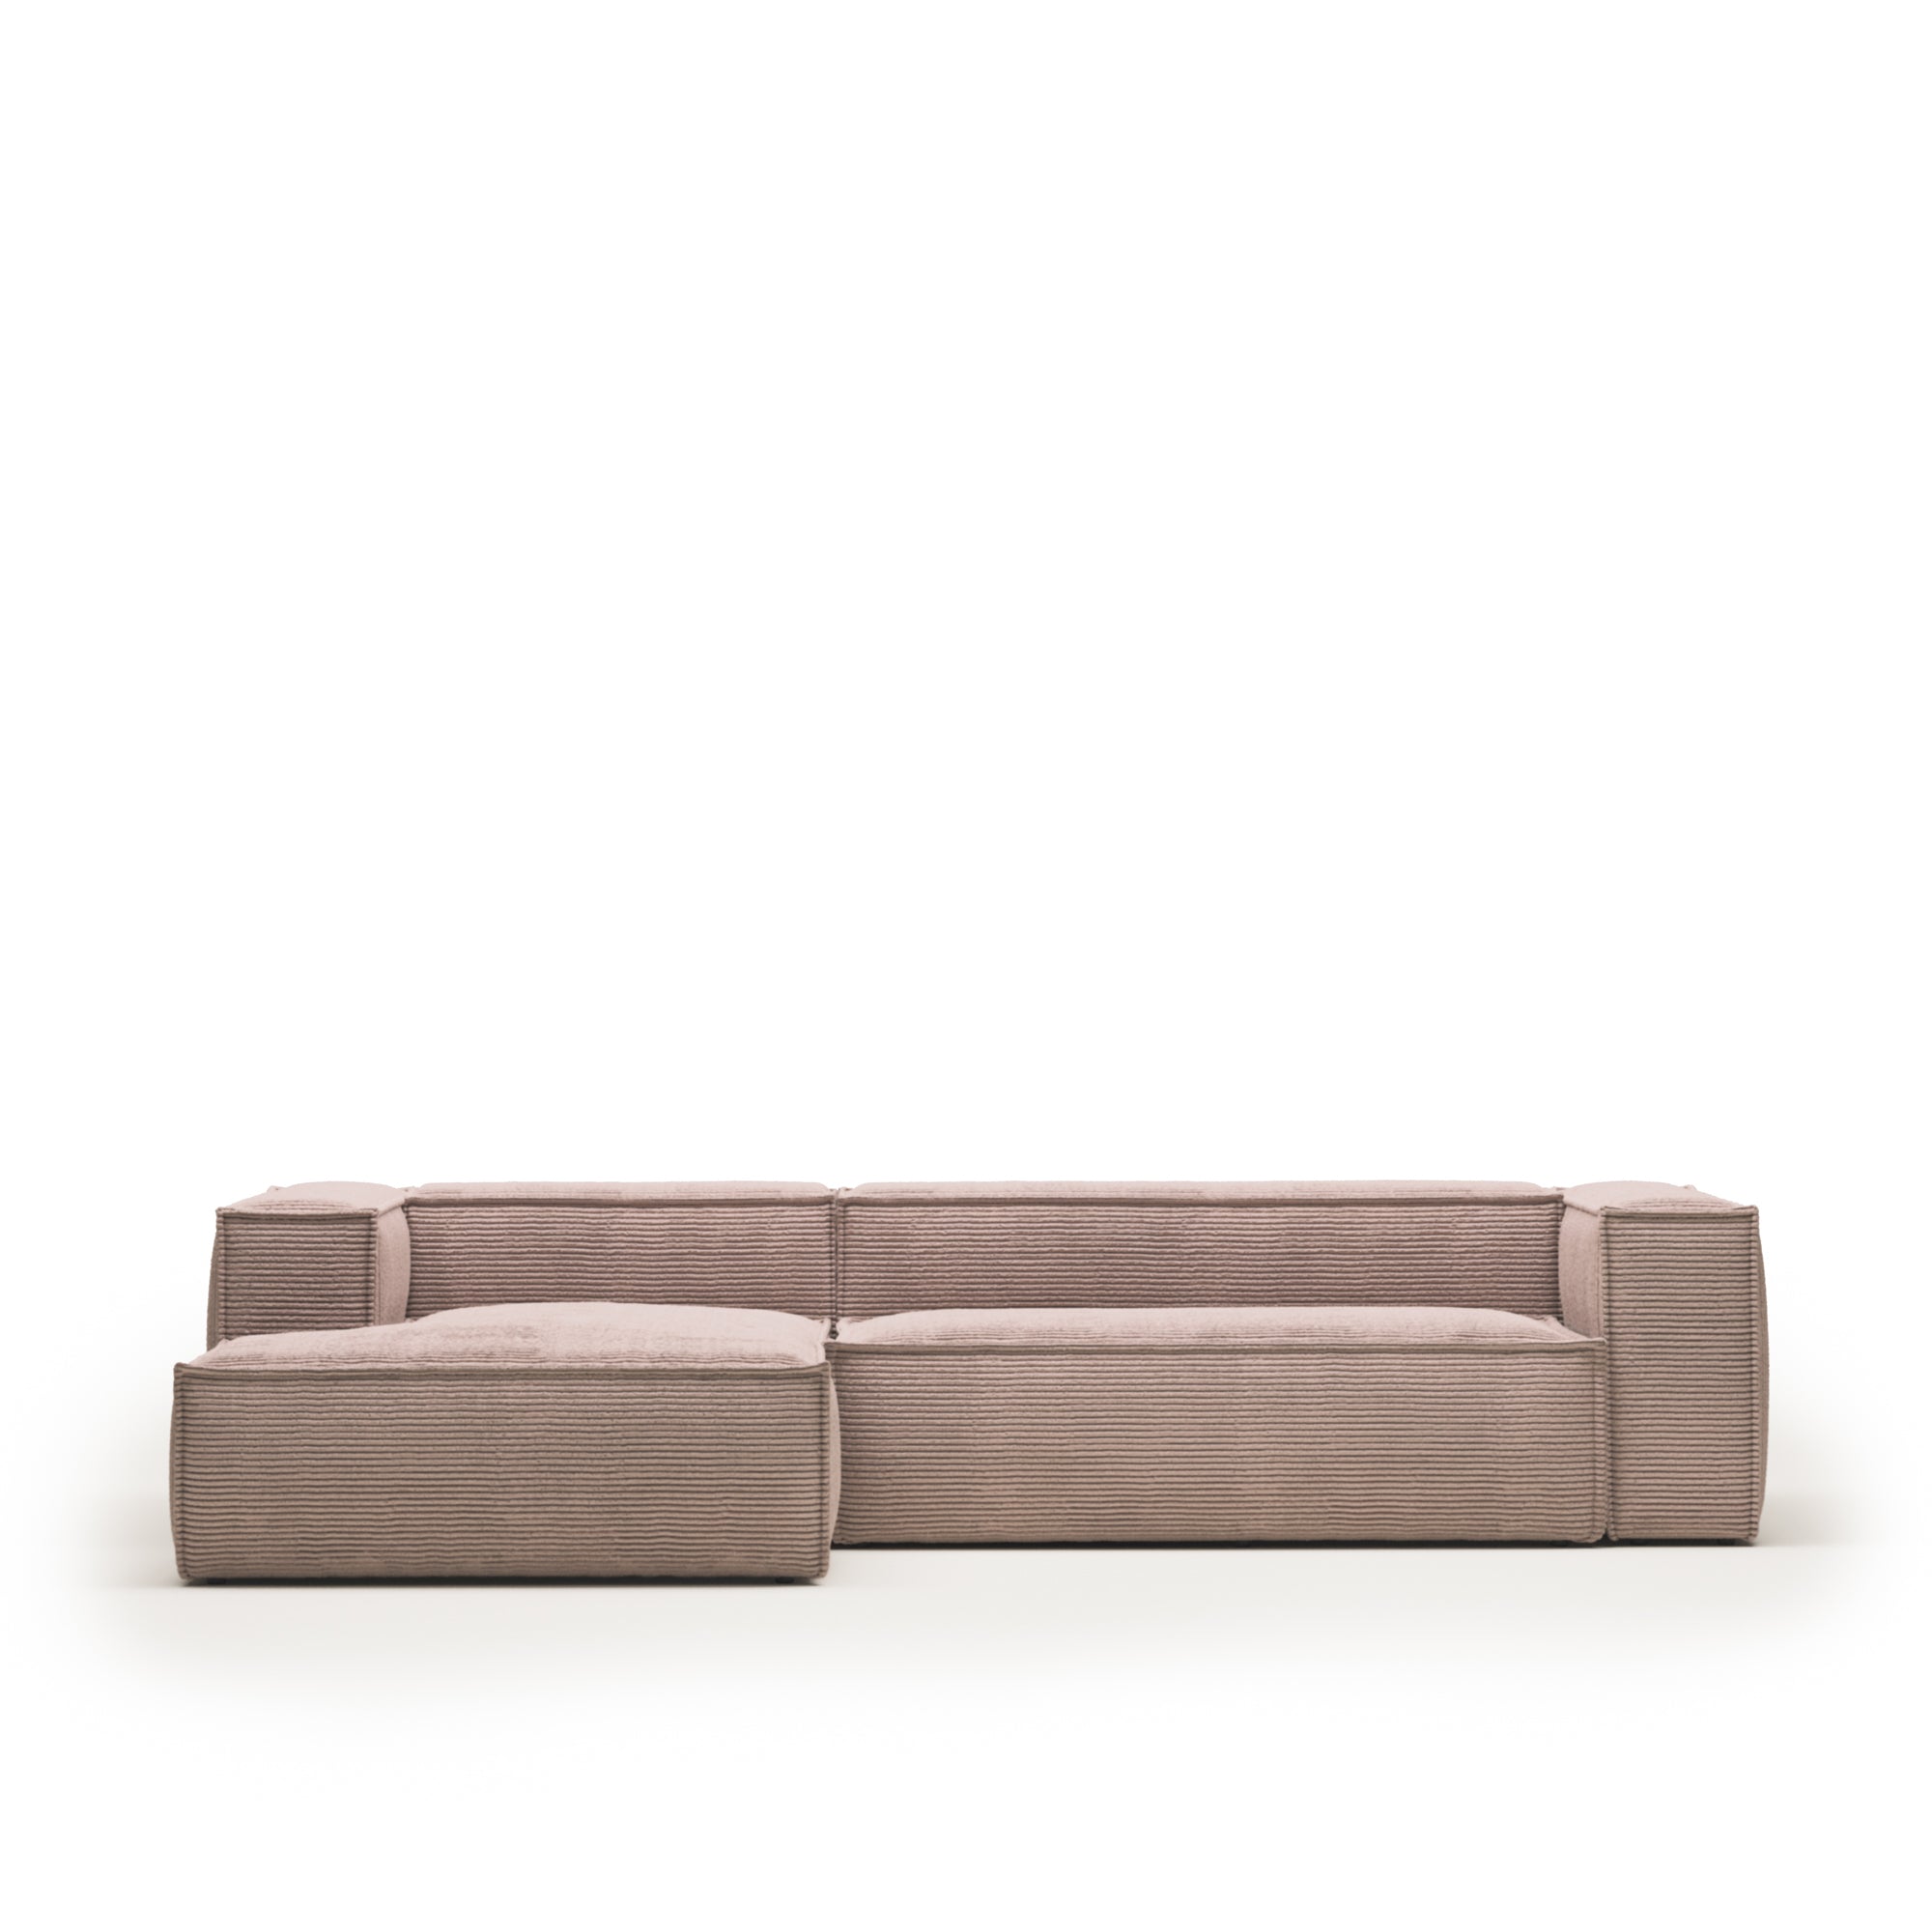 Blok 3 seater sofa with left side chaise longue in pink wide seam corduroy, 300 cm